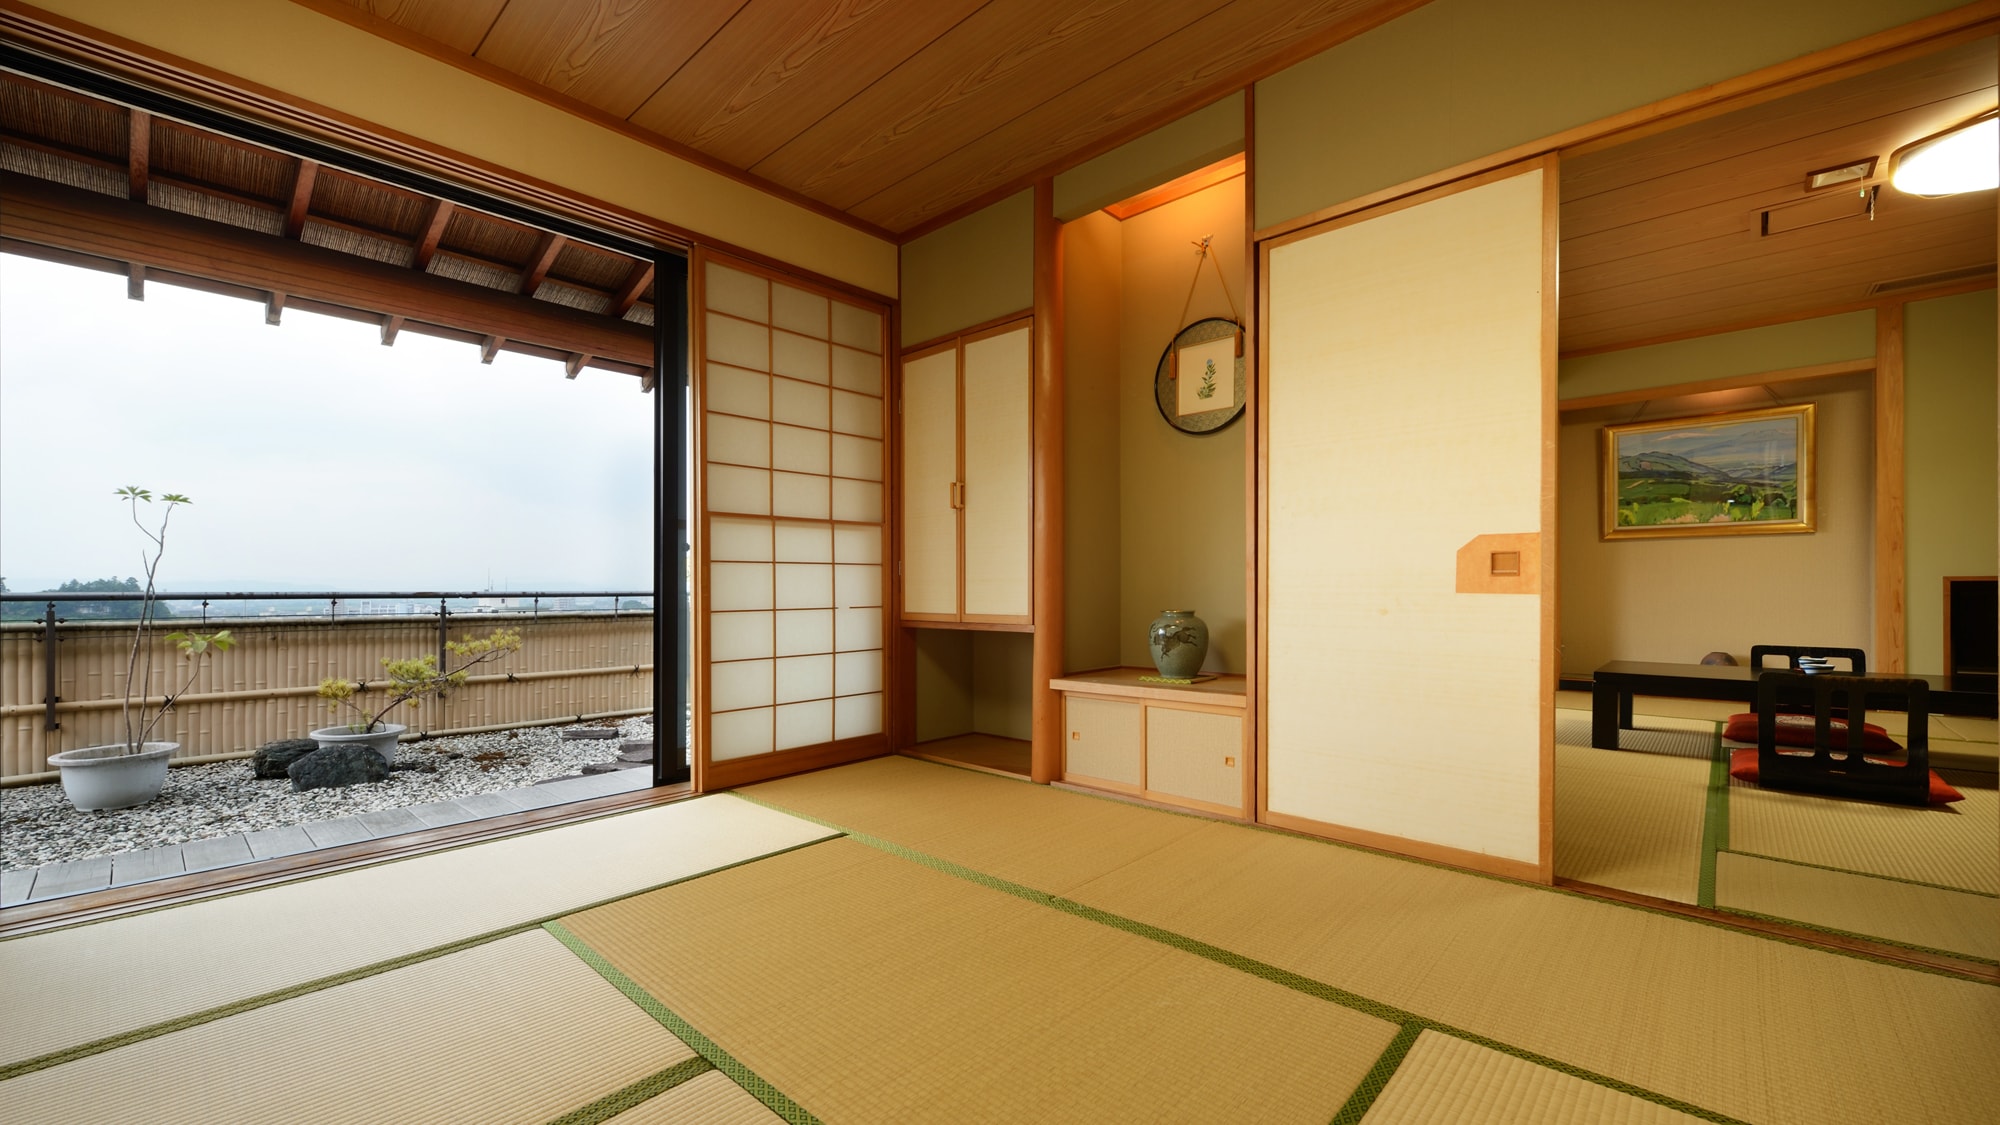 [Main building] With a view garden_Japanese-style room 11 + 10 tatami mats